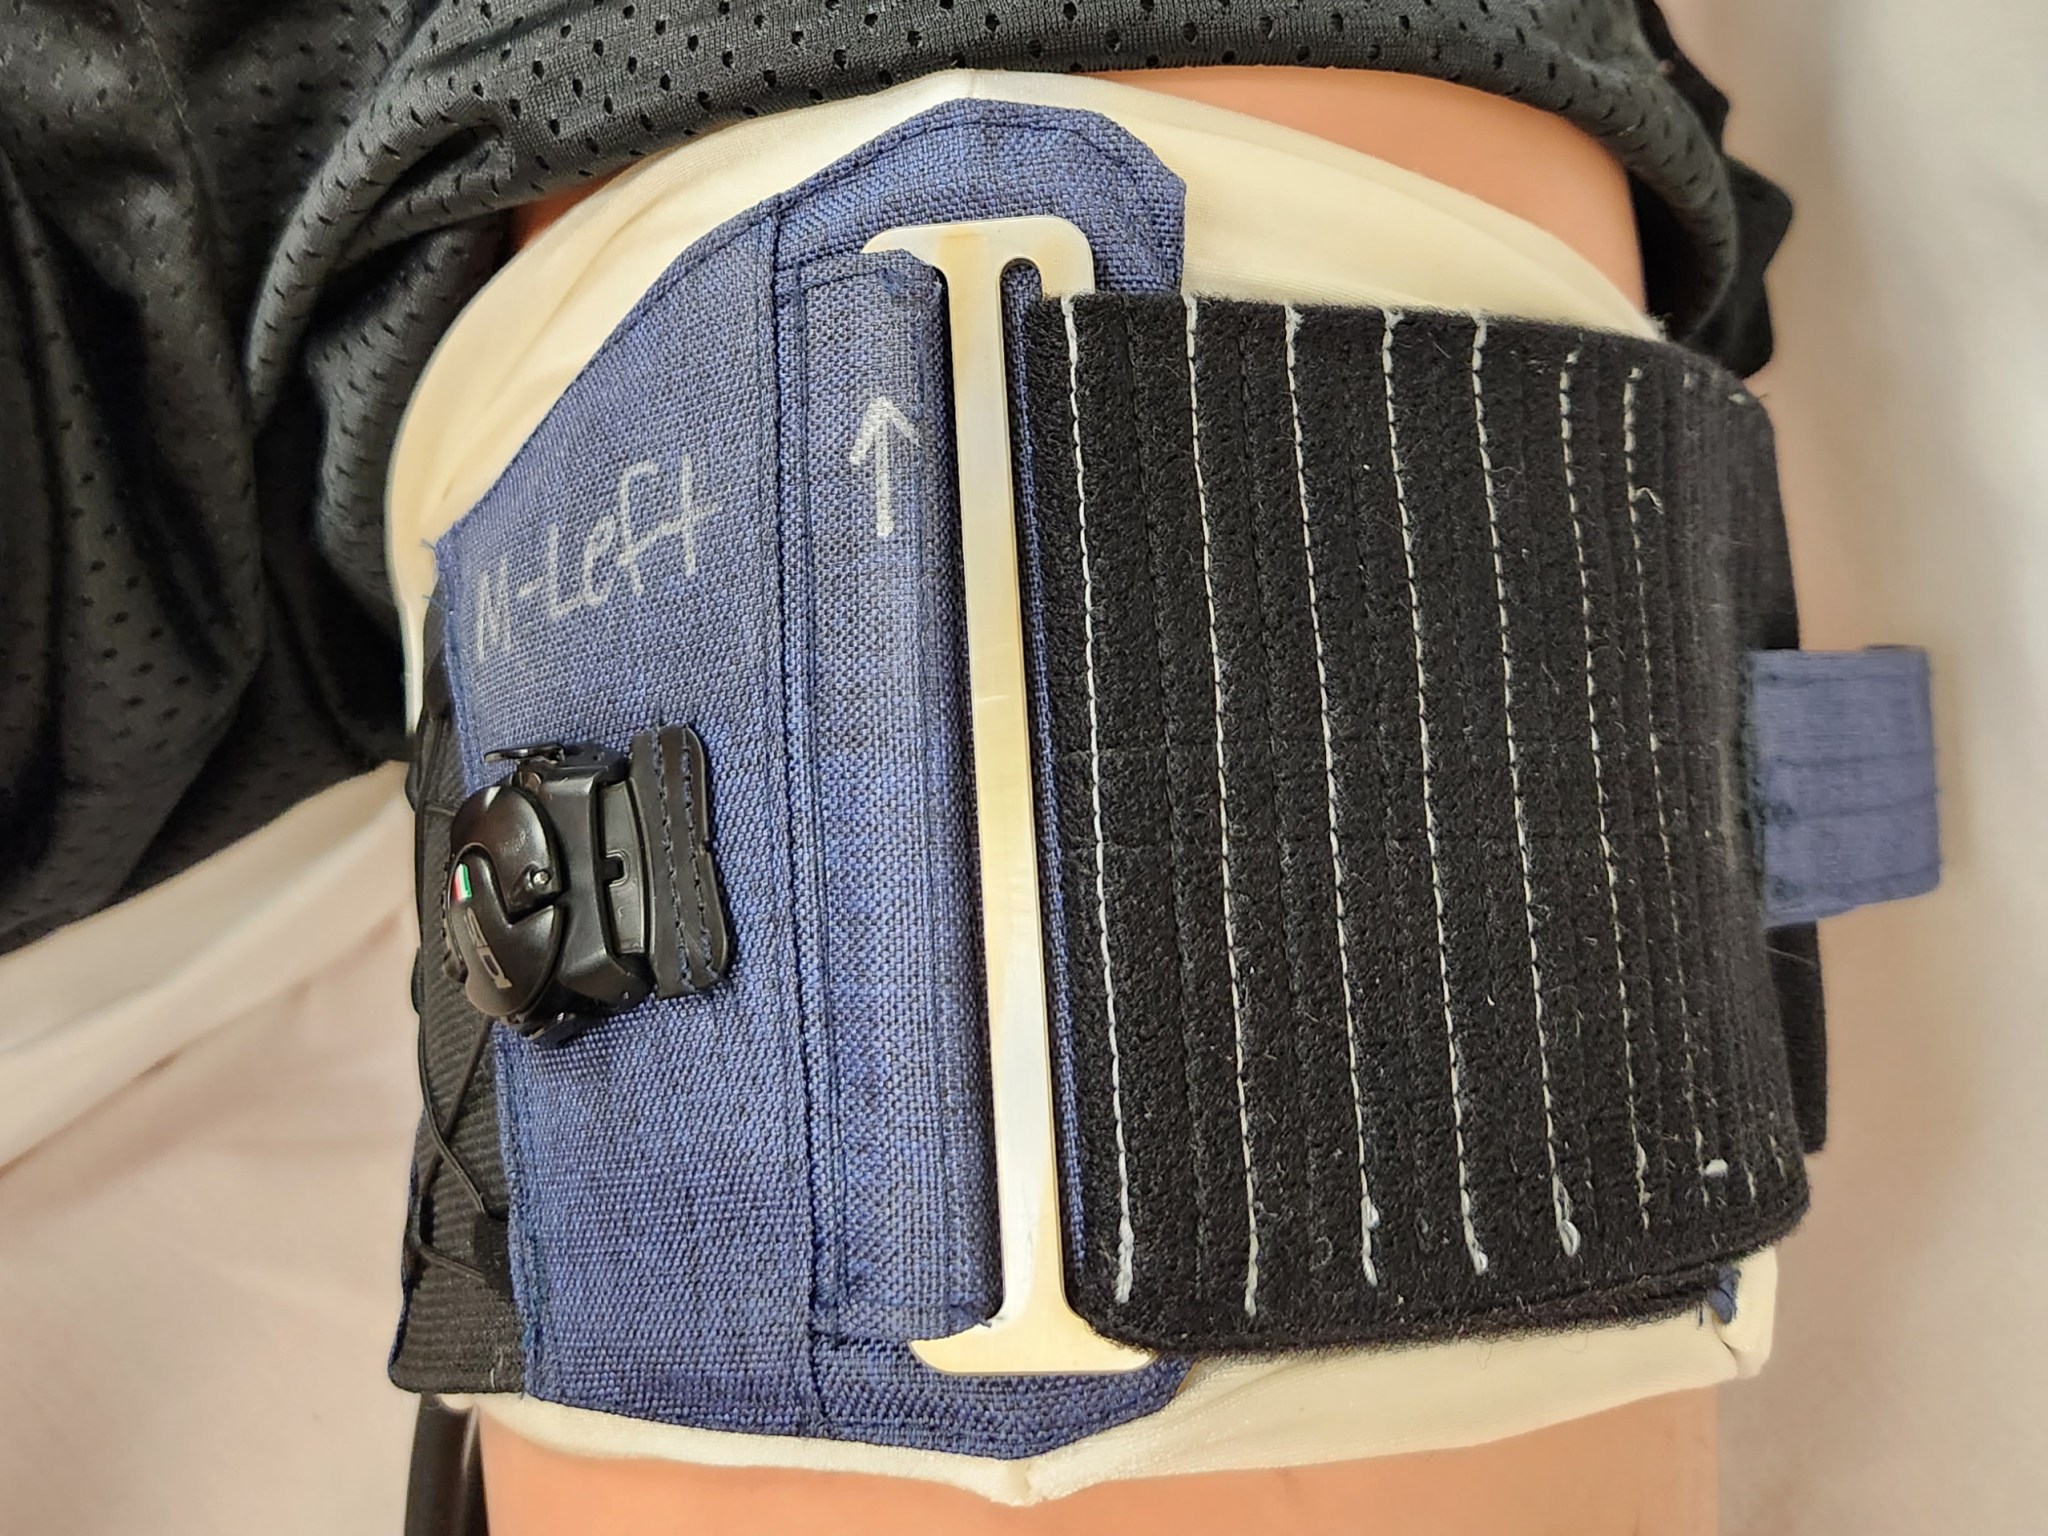 A person wearing black shorts lies on a white sheet with a thigh cuff around their upper leg. The cuff is blue with a black Velcro attachment and is labeled “left.”